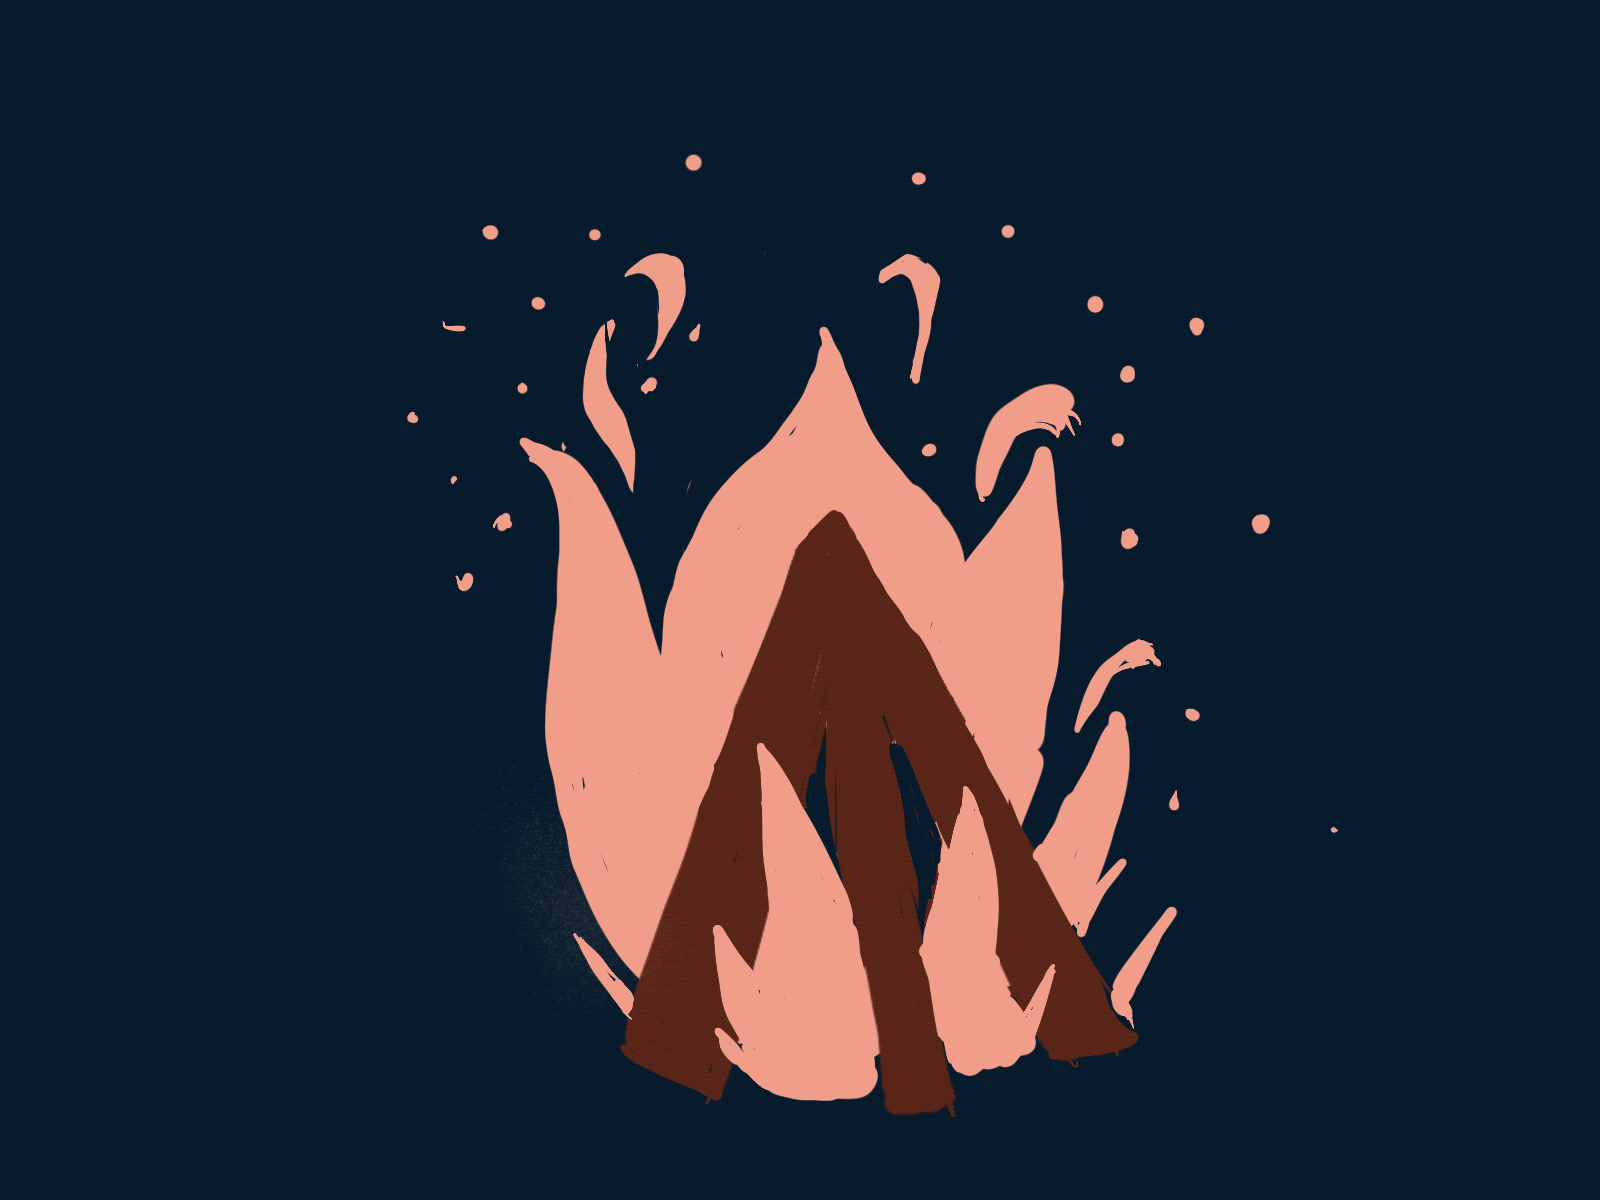 Campfire campfire fire frame by frame gif motion procreate weekly warm up